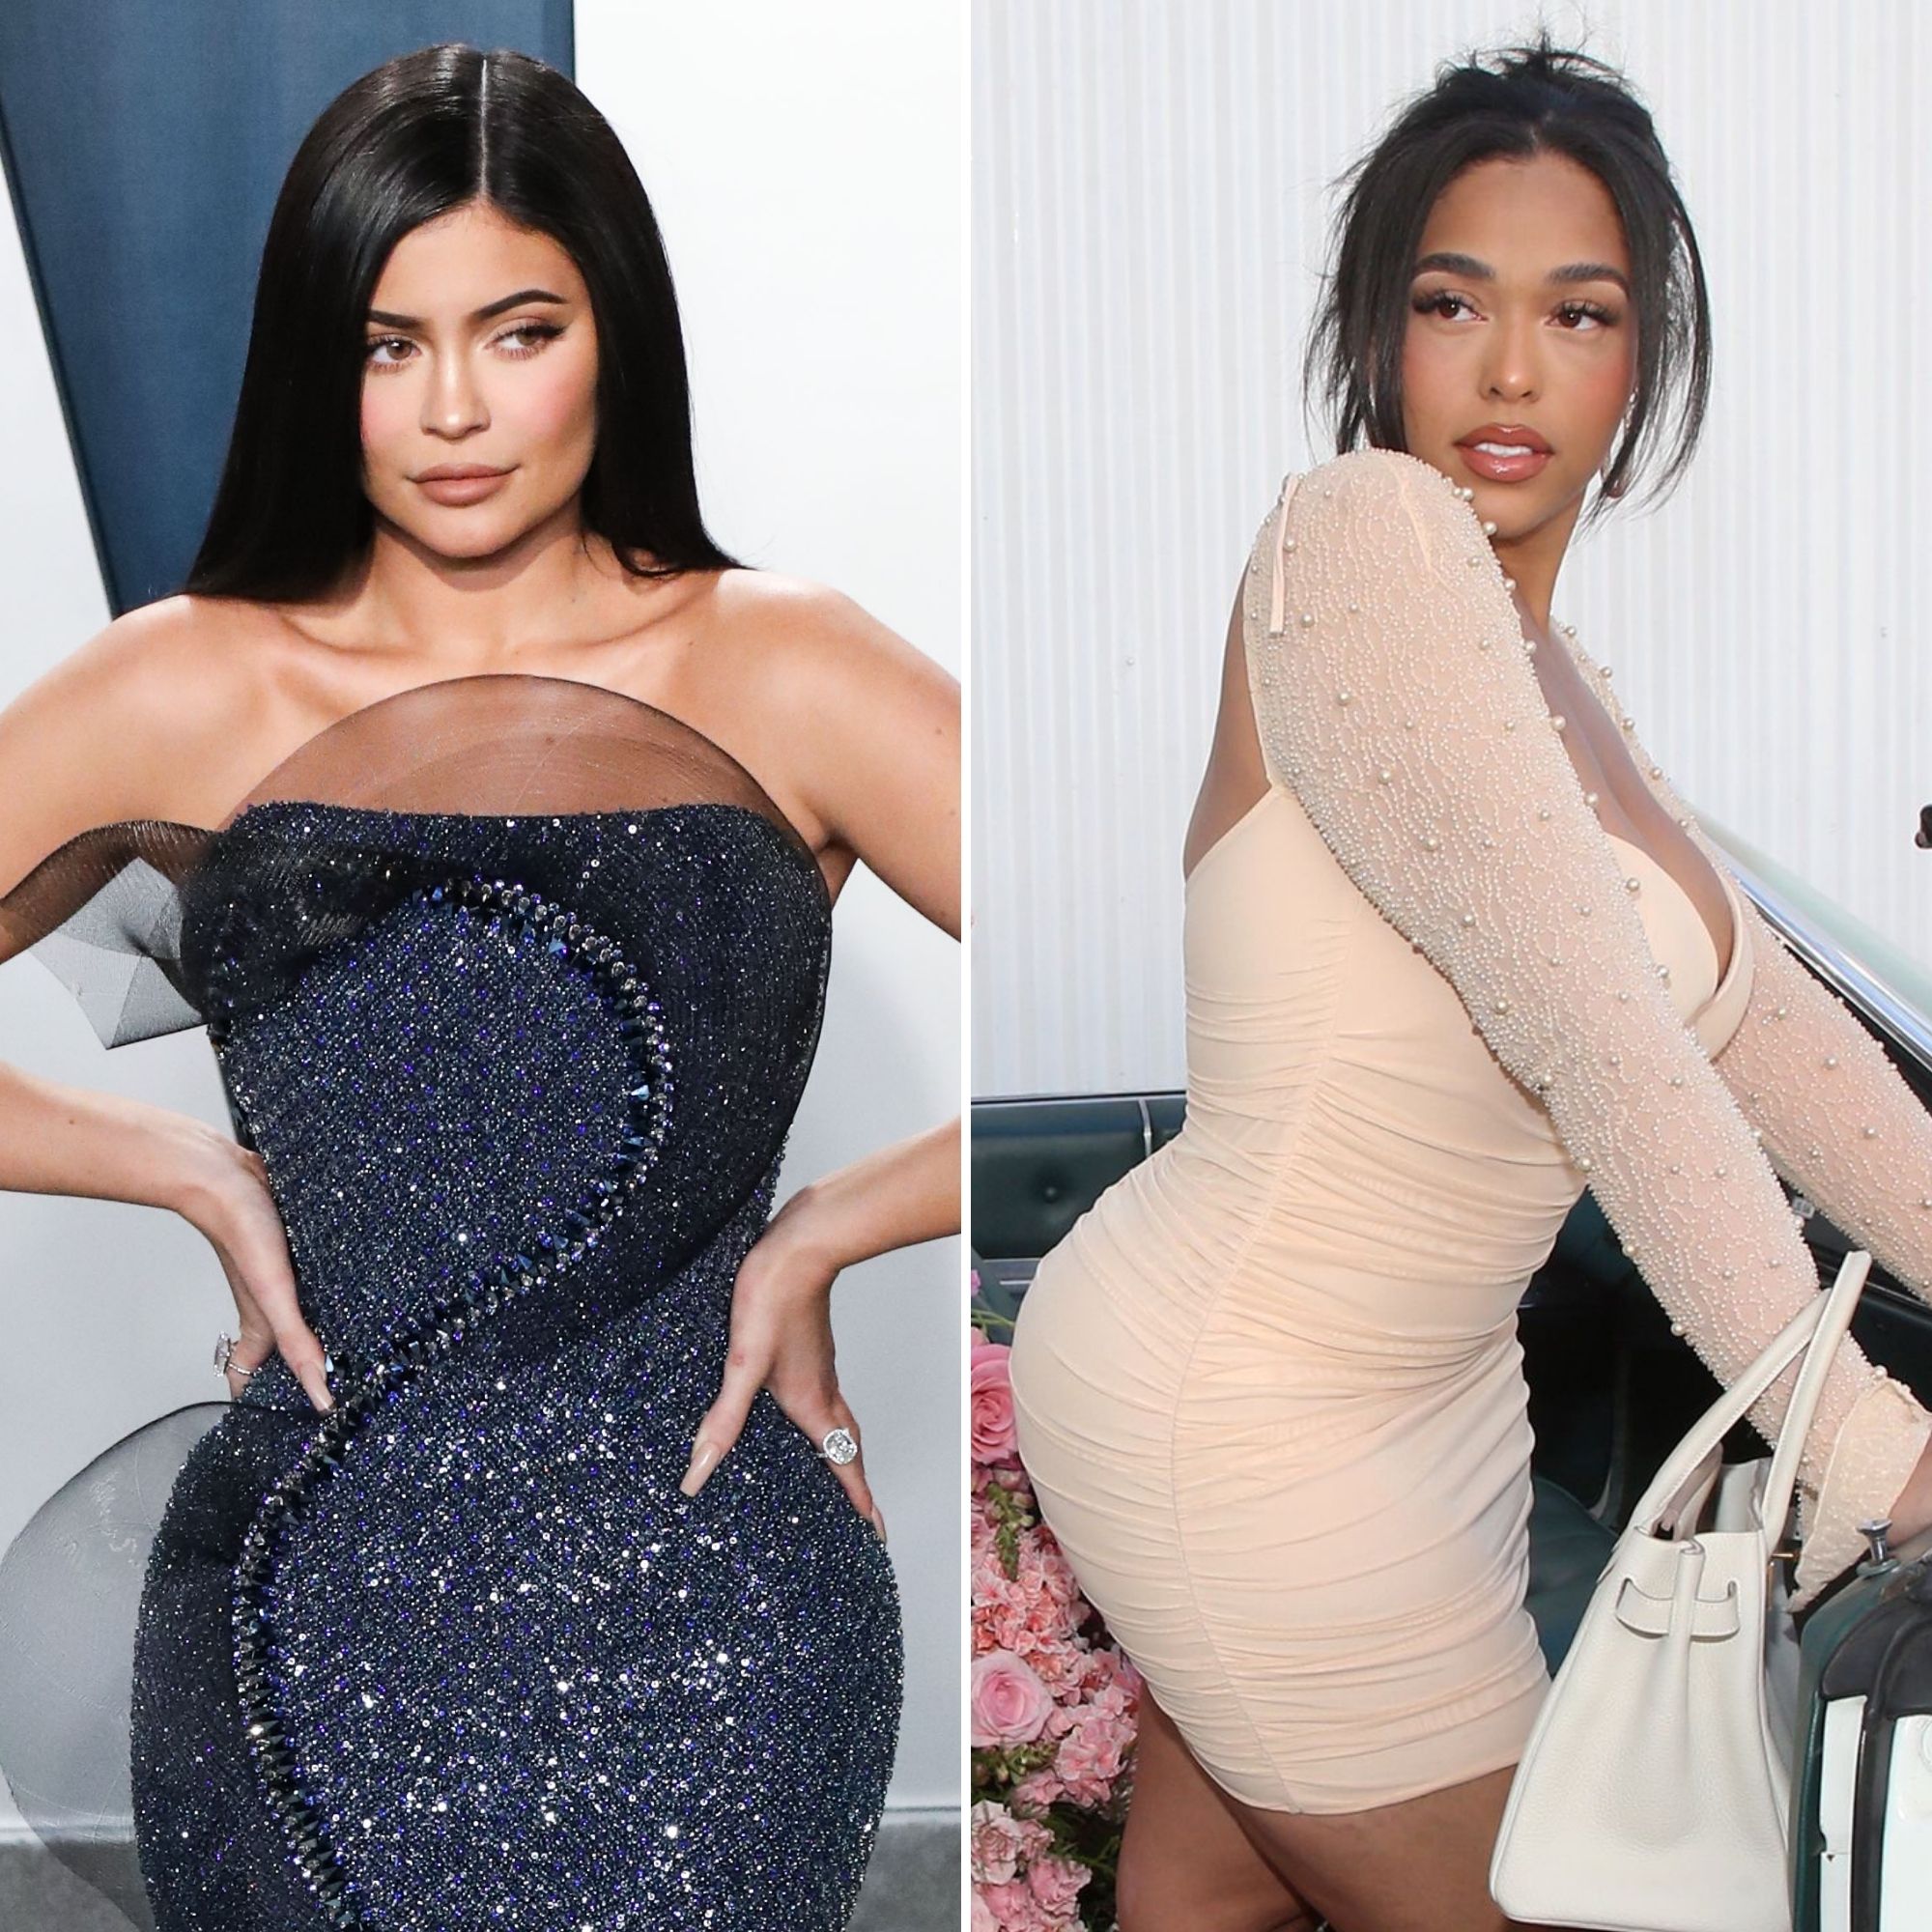 Who Is Jordyn Woods And What Is Going To Happen To Kylie Jenner's